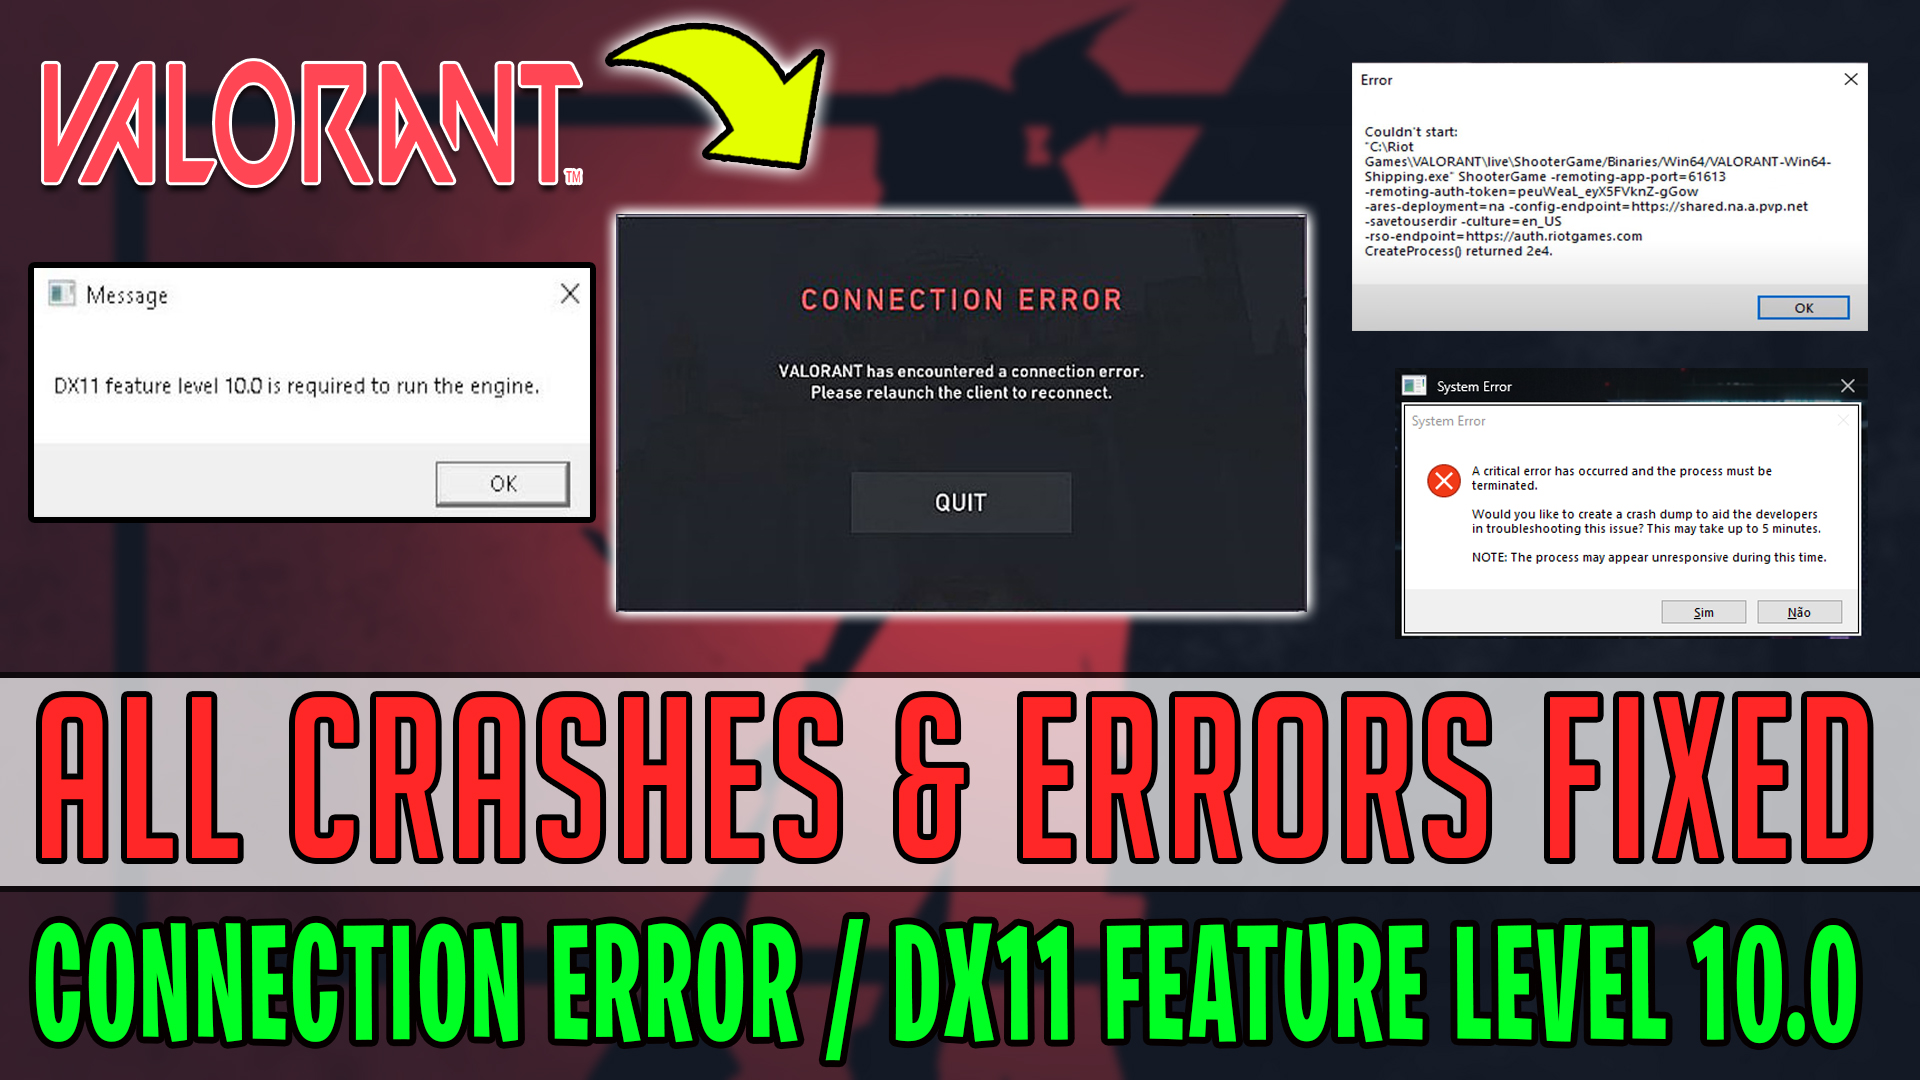 Dx11 feature. Dx11 feature 10.0 is required to Run the engine. Валорант dx11 feature Level 10.0 is required to Run the engine. DX 11 feature Level 10.0 is required Run the engine решение. Critical Error has occurred valorant.